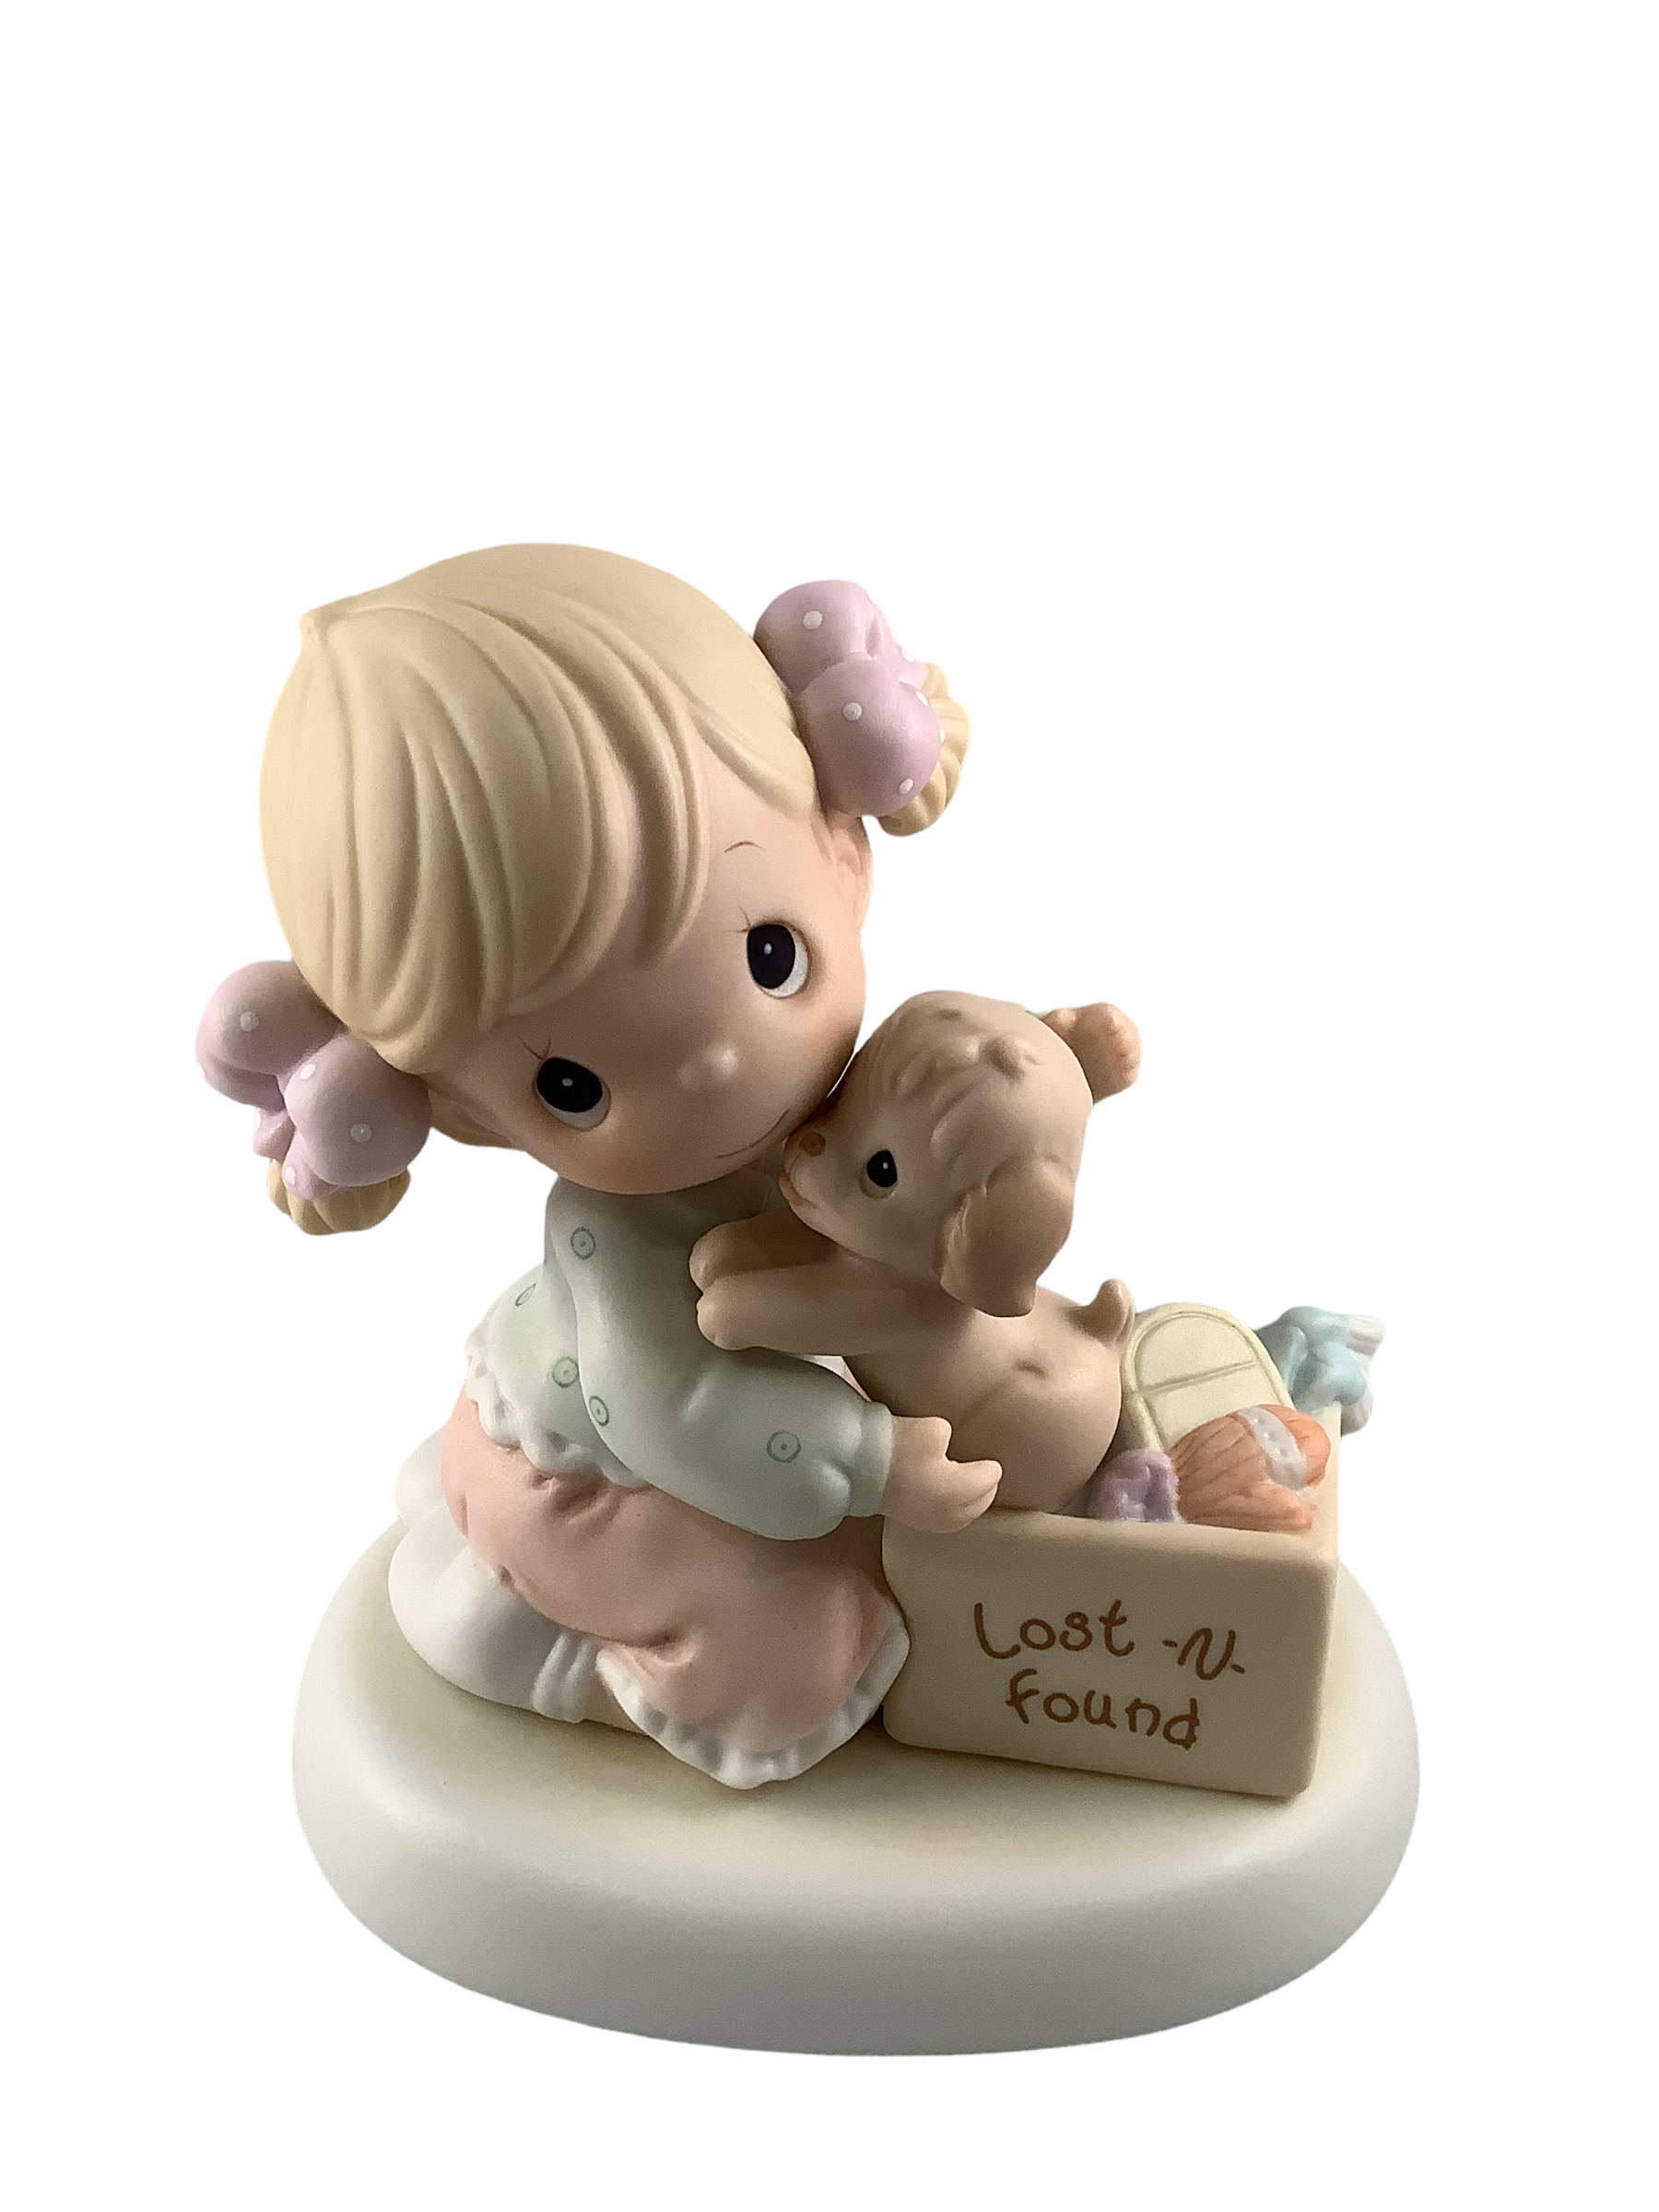 You Just Can't Replace A Good Friendship - Precious Moment Figurine